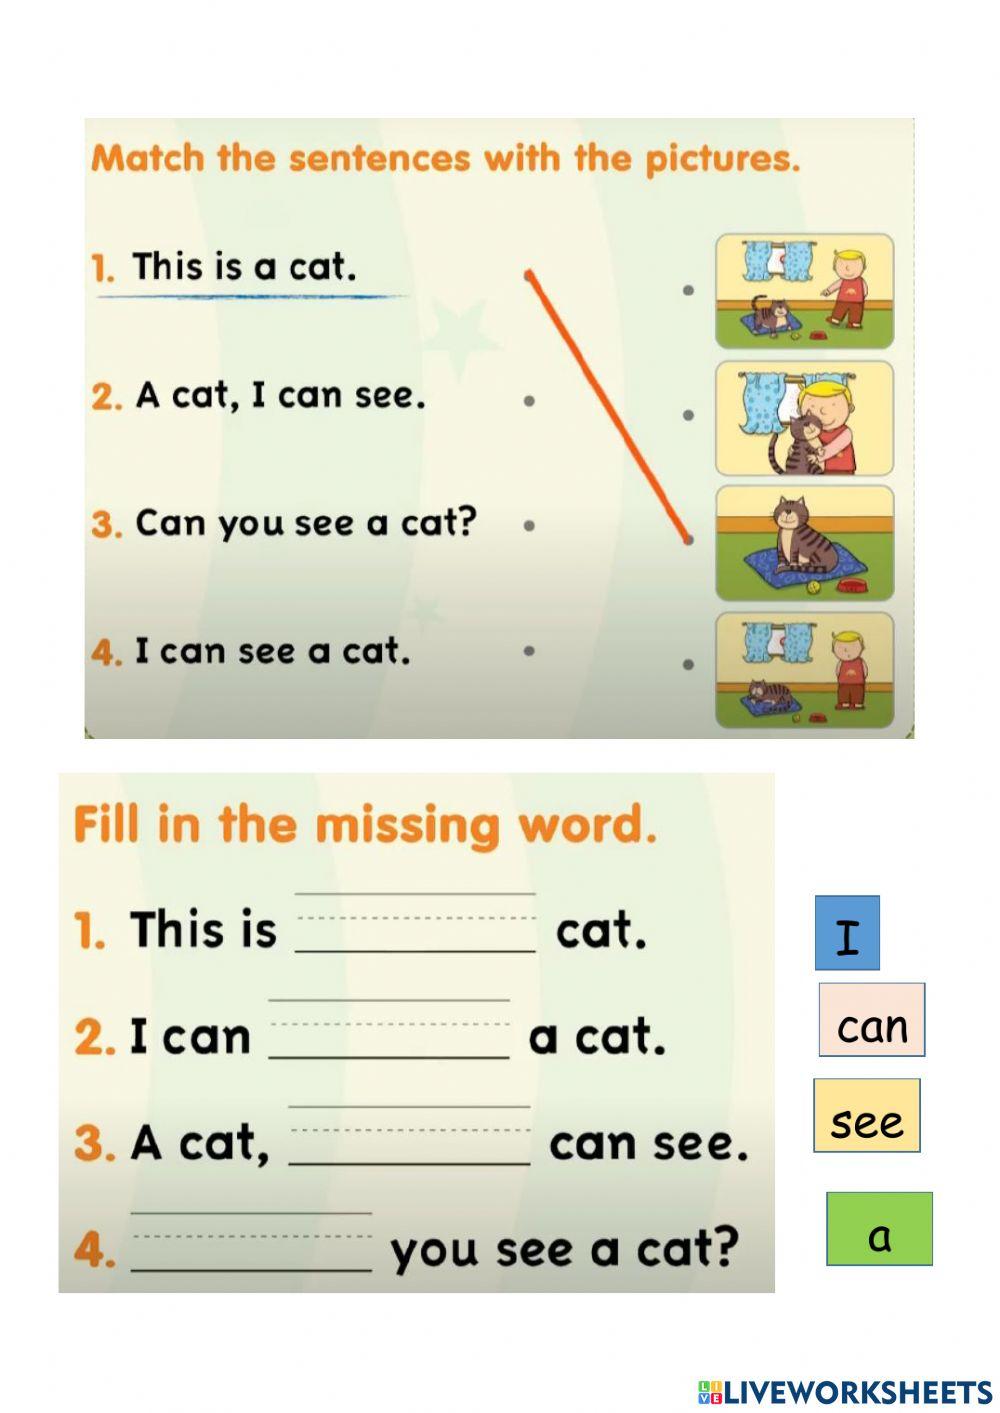 Sight words I, can, see, a